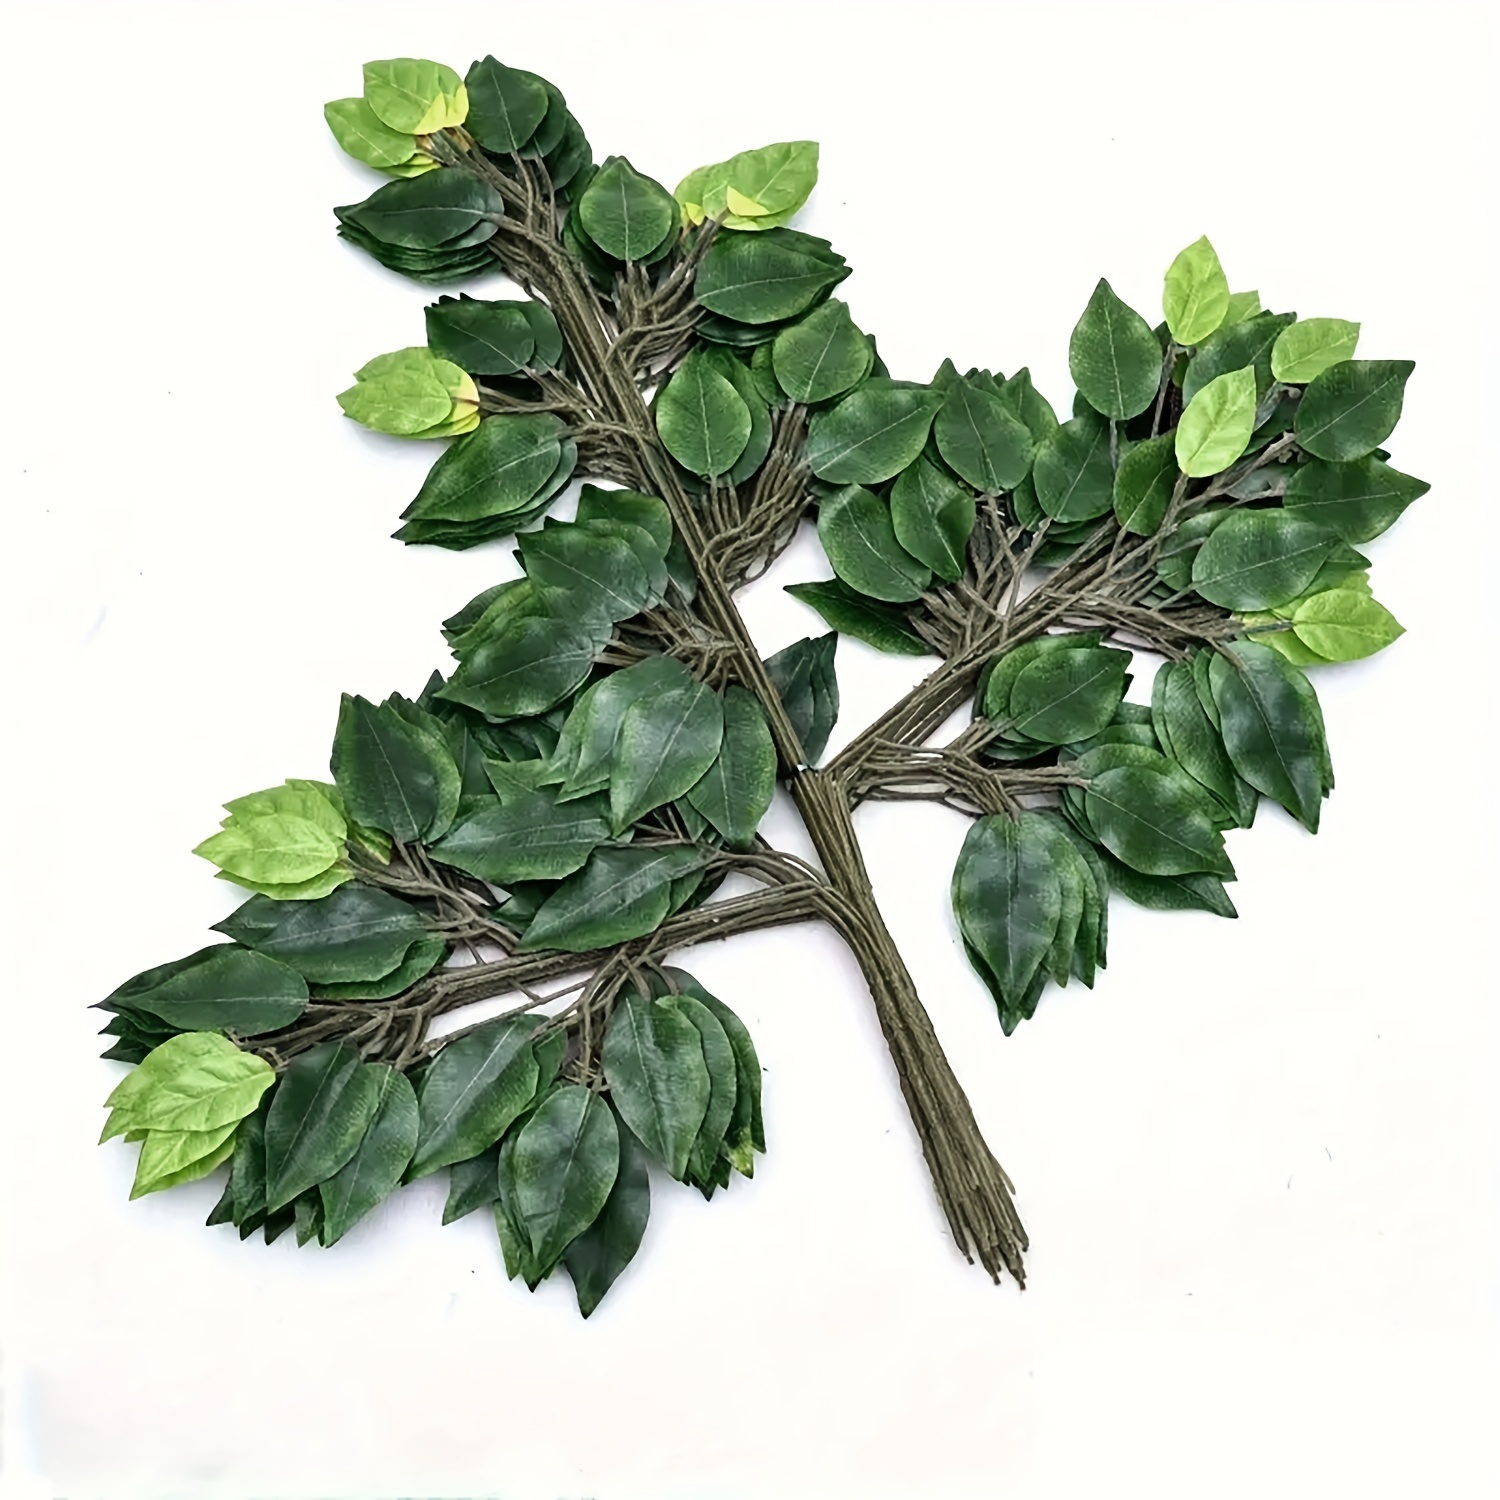 

12pcs Artificial Plants, Fake Branch Tree Leaves Plastic Plant For Home Gardening Diy Decoration (brown Handled Banyan Leaves)